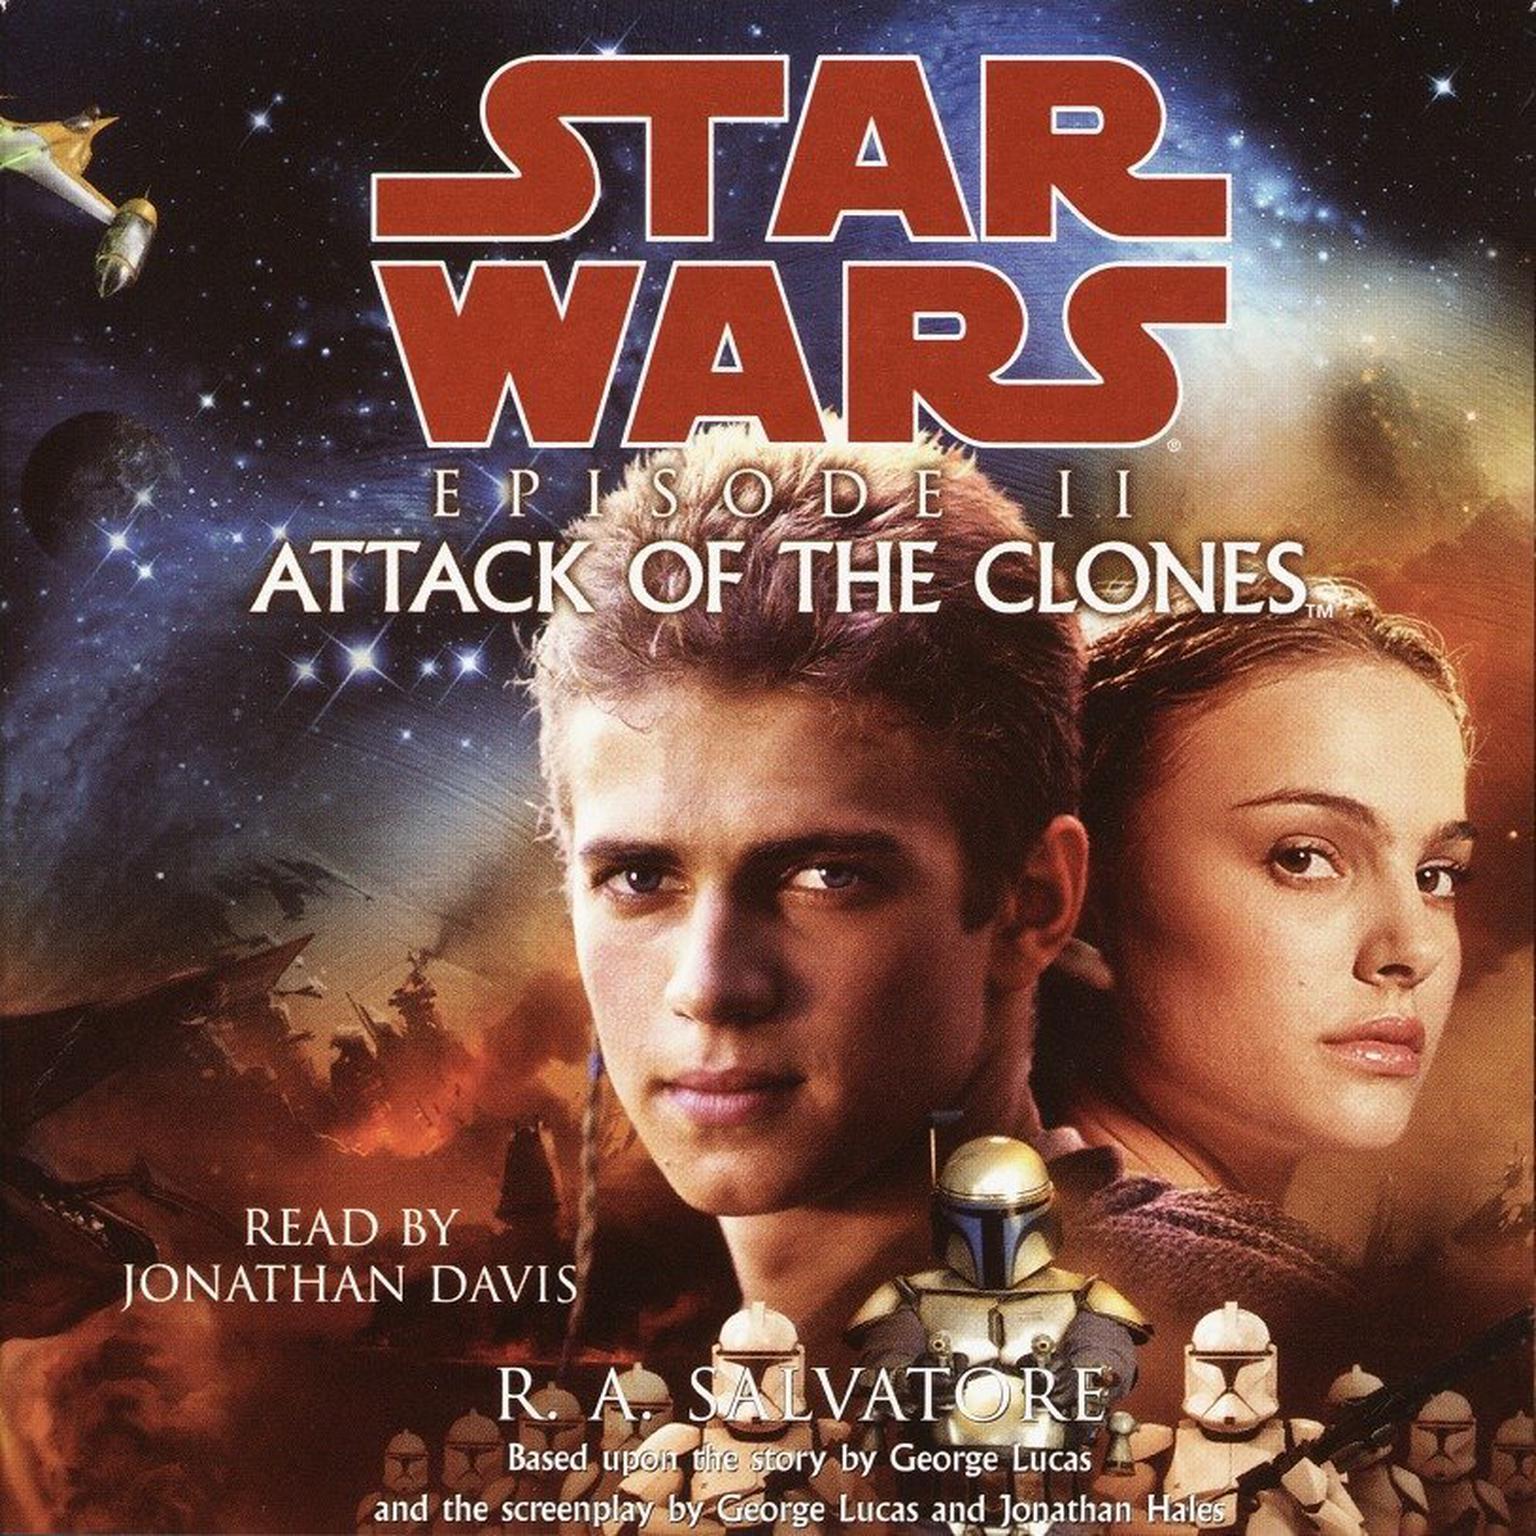 Star Wars: Episode II: Attack of the Clones (Abridged) Audiobook, by R. A. Salvatore